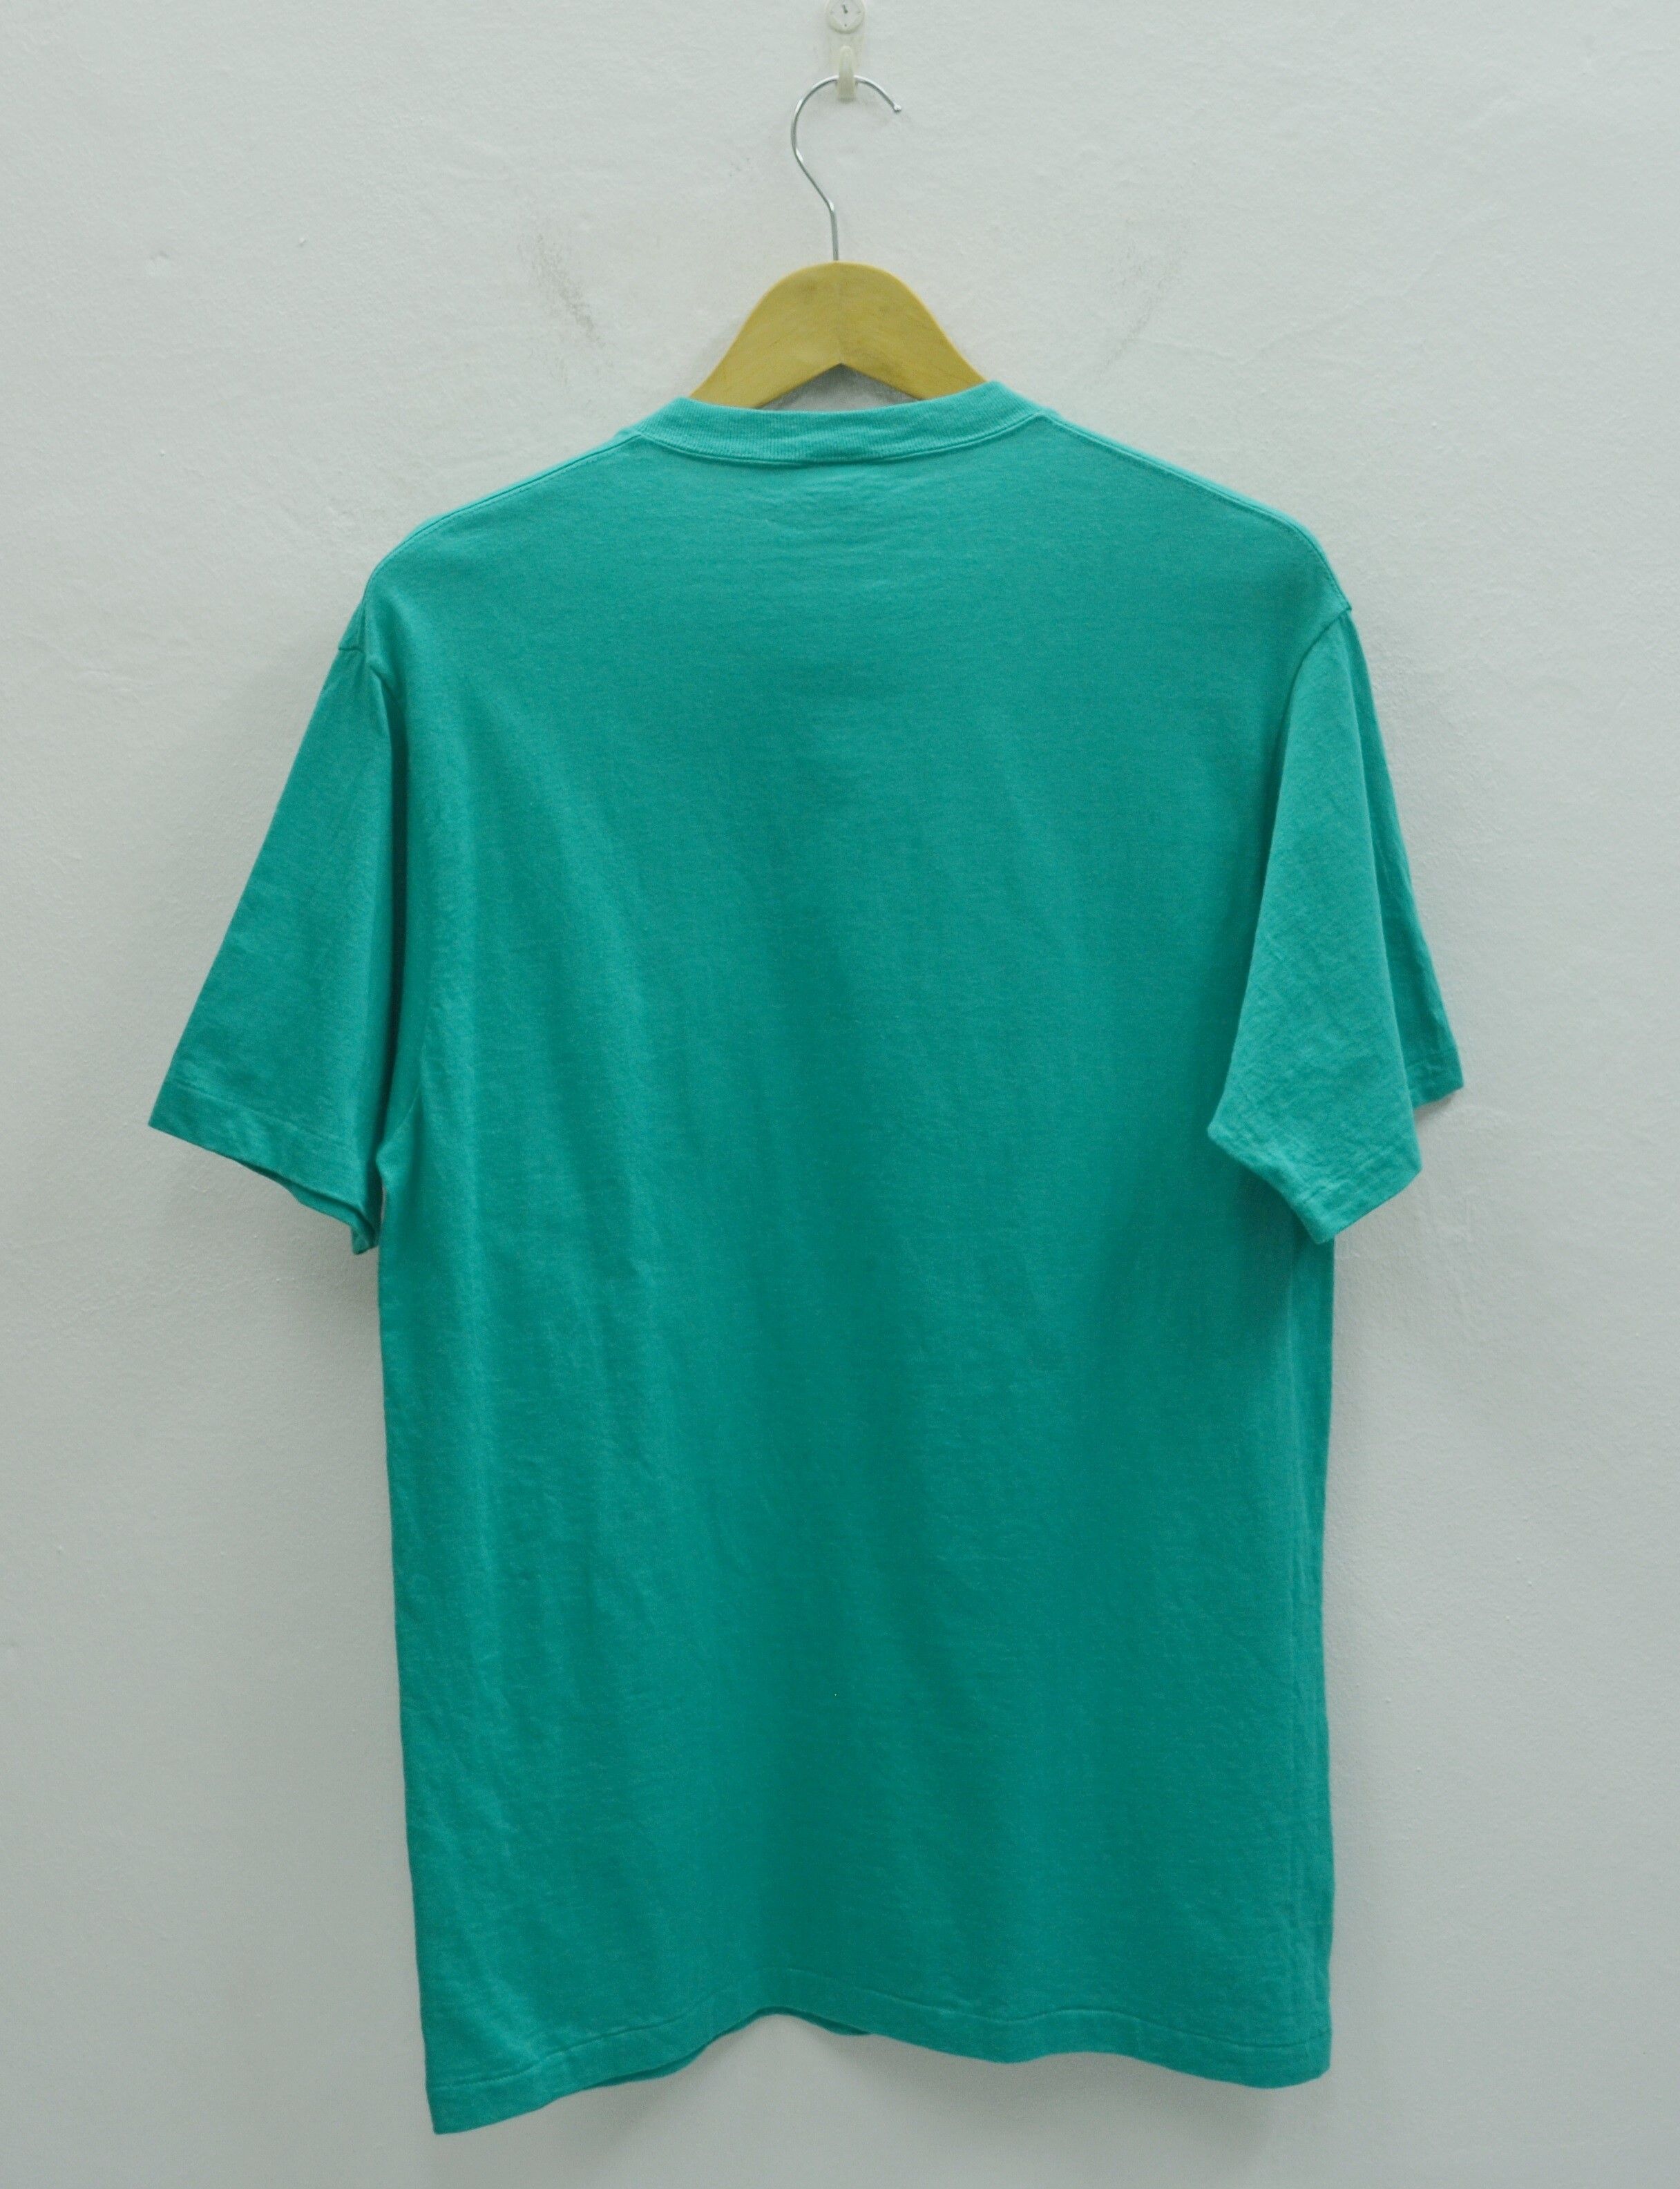 Vintage 90s JCPenney Royal Comfort Blank Pocket Tee Made In USA Size US L / EU 52-54 / 3 - 2 Preview